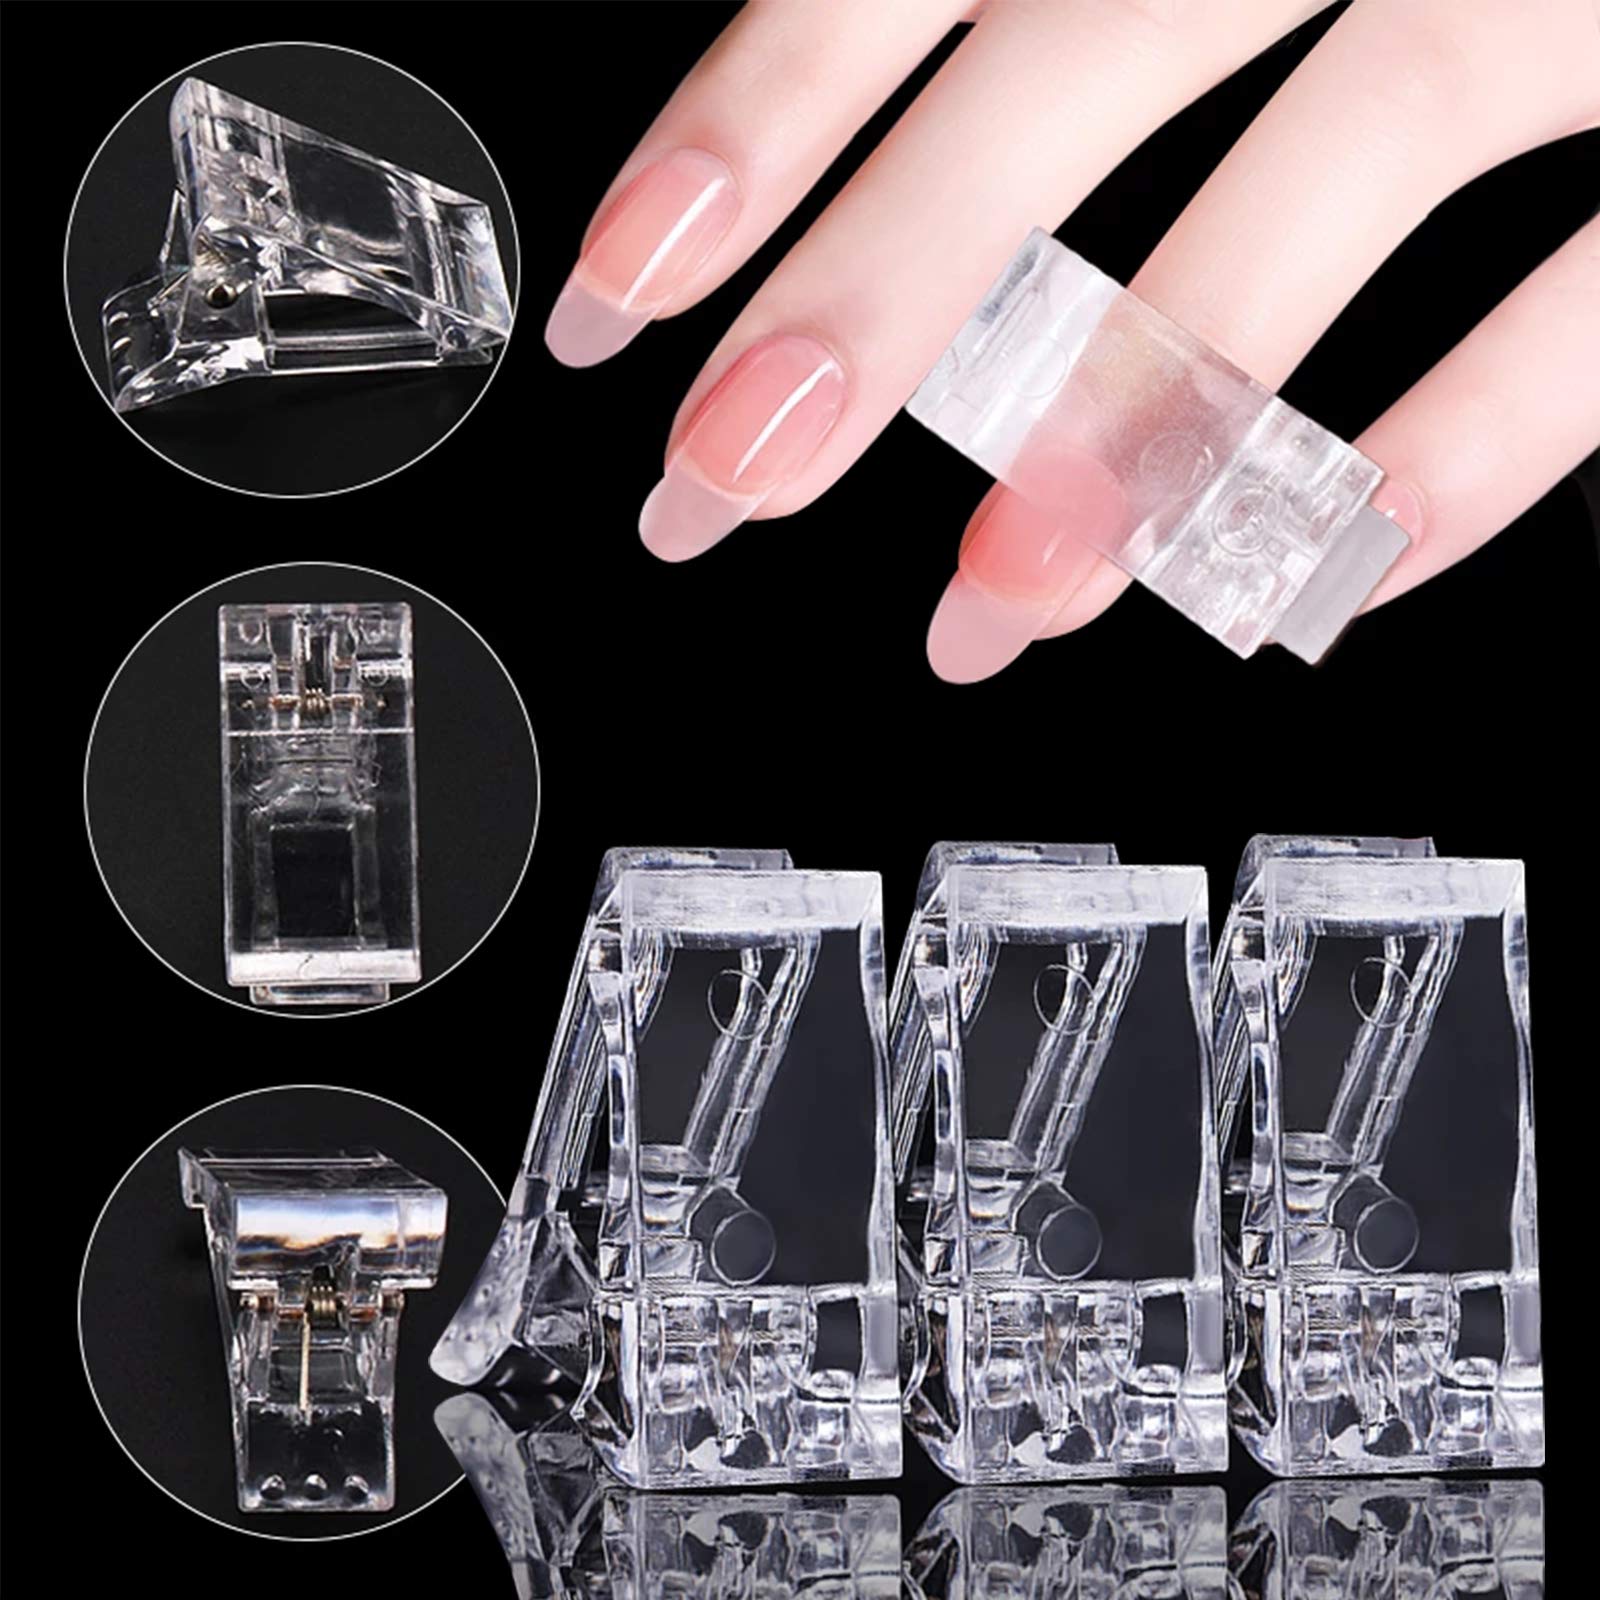 Dockapa Nail Tips Clip for Quick Building Polygel Nail Forms Nail Clips for Polygel Finger Nail Extension UV LED Builder Clamps Manicure Nail Art Tool